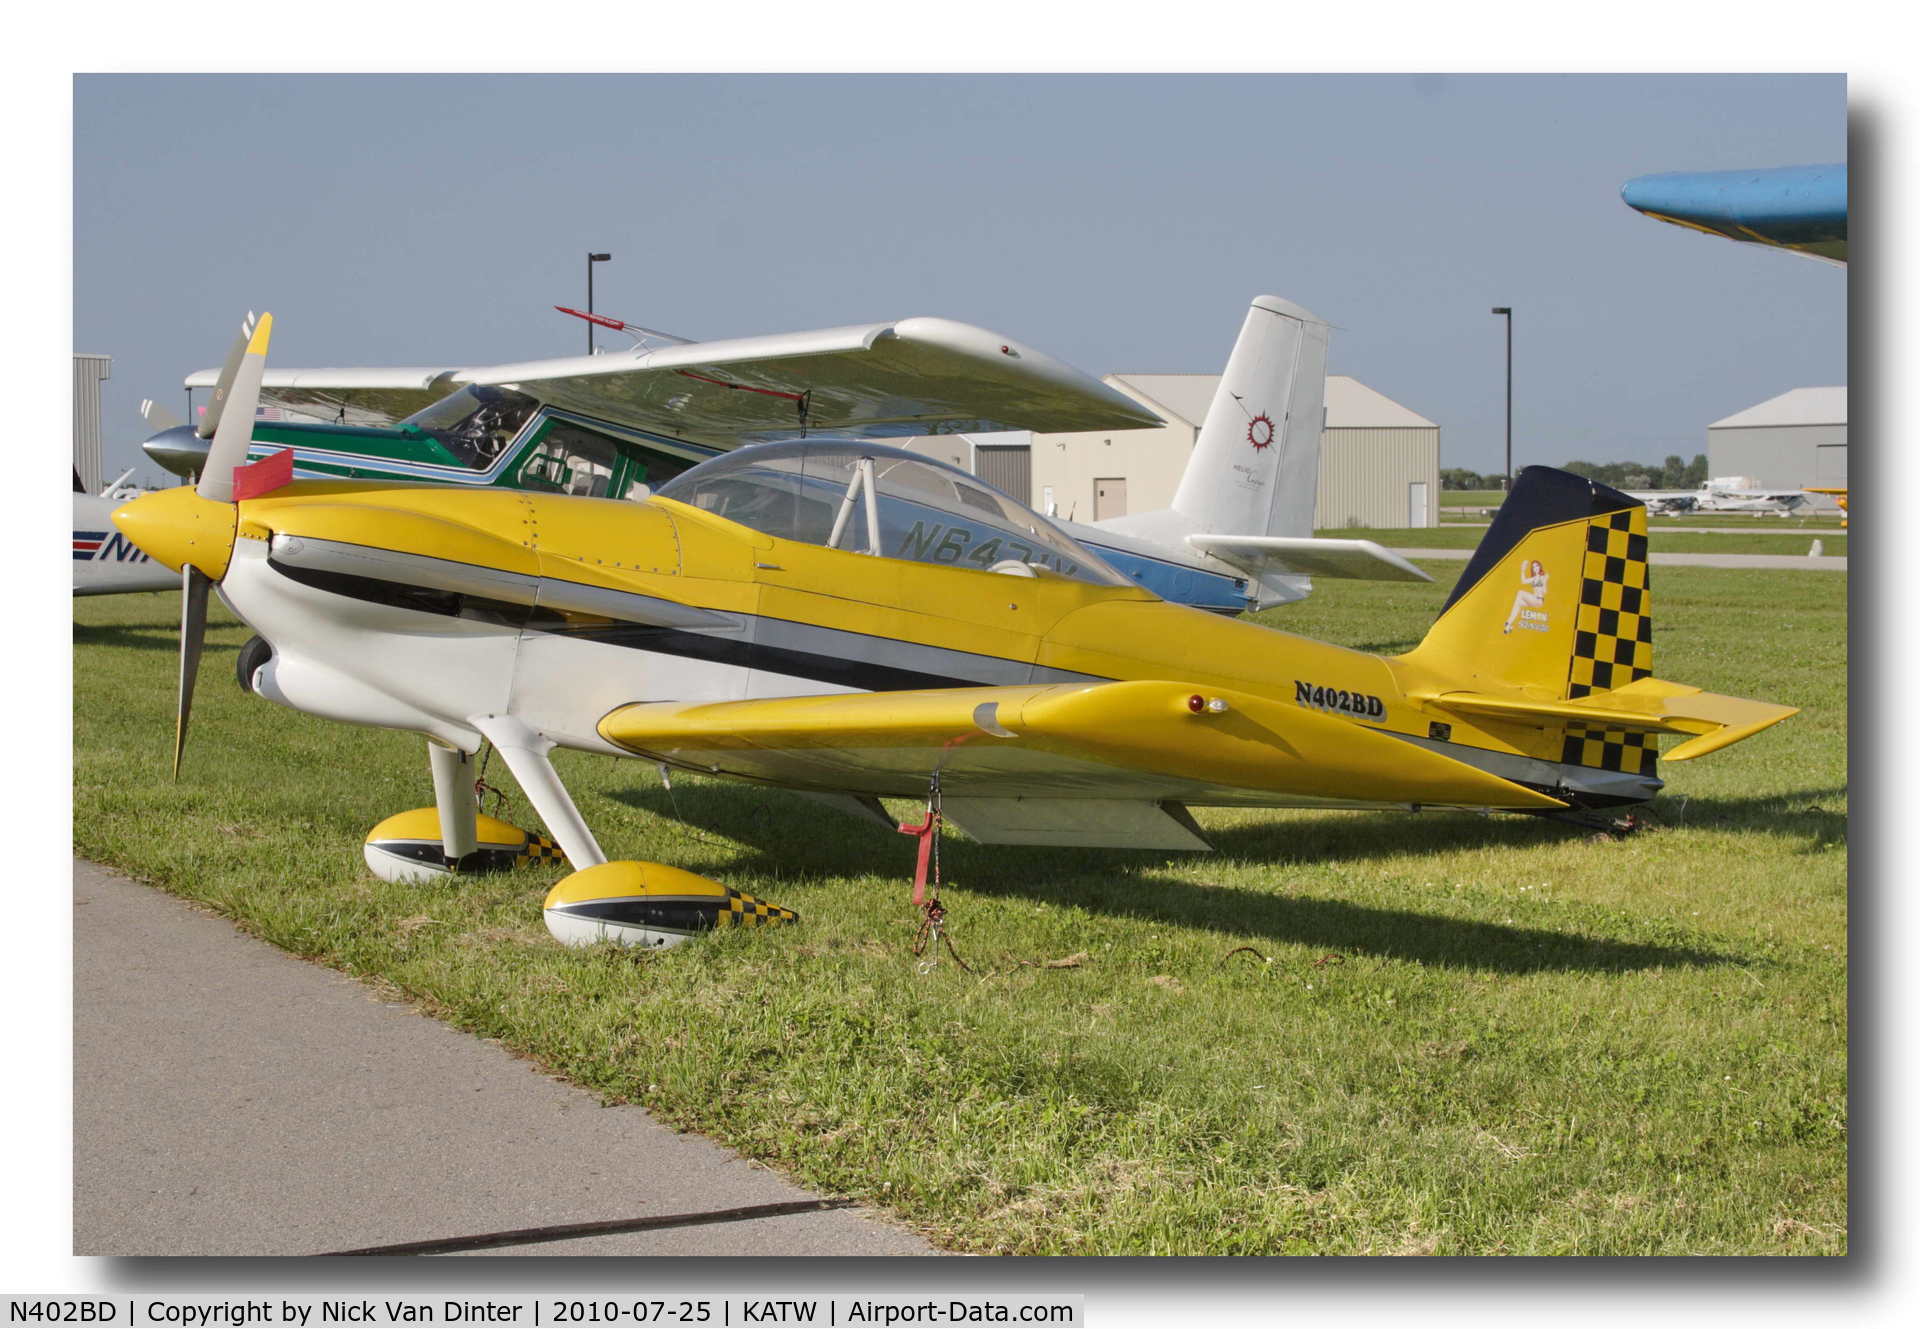 N402BD, 2003 Vans RV-4 C/N 4290, Sure KATW is nice ... I still want to go to Oshkosh!